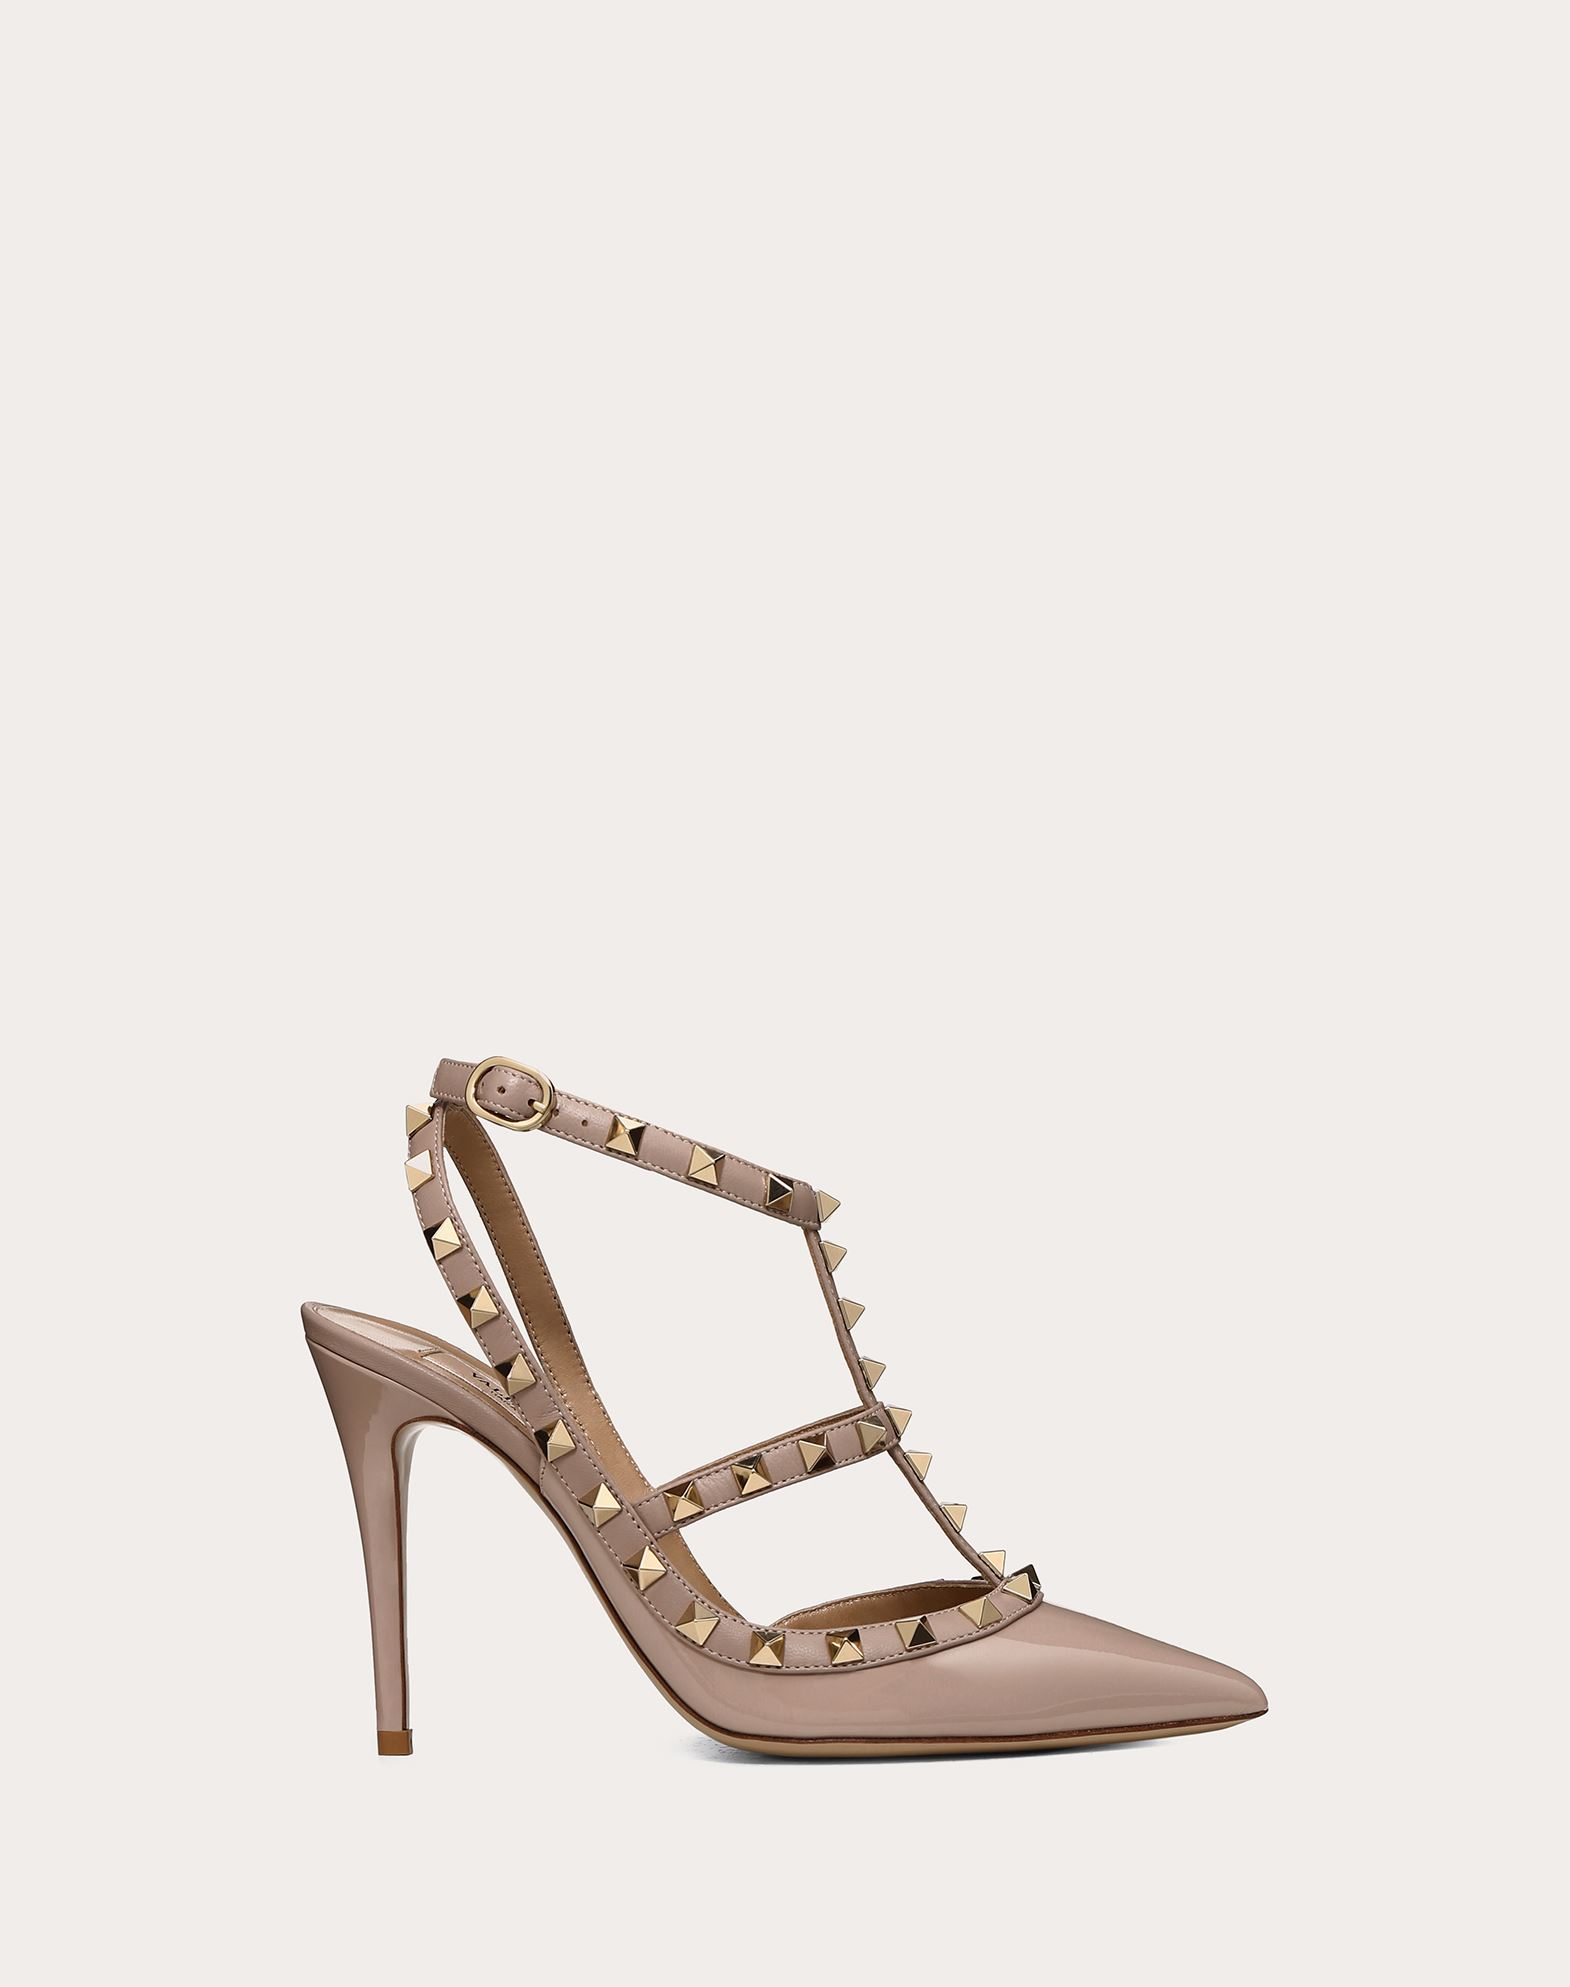 Patent Rockstud Caged Pump 100mm for 